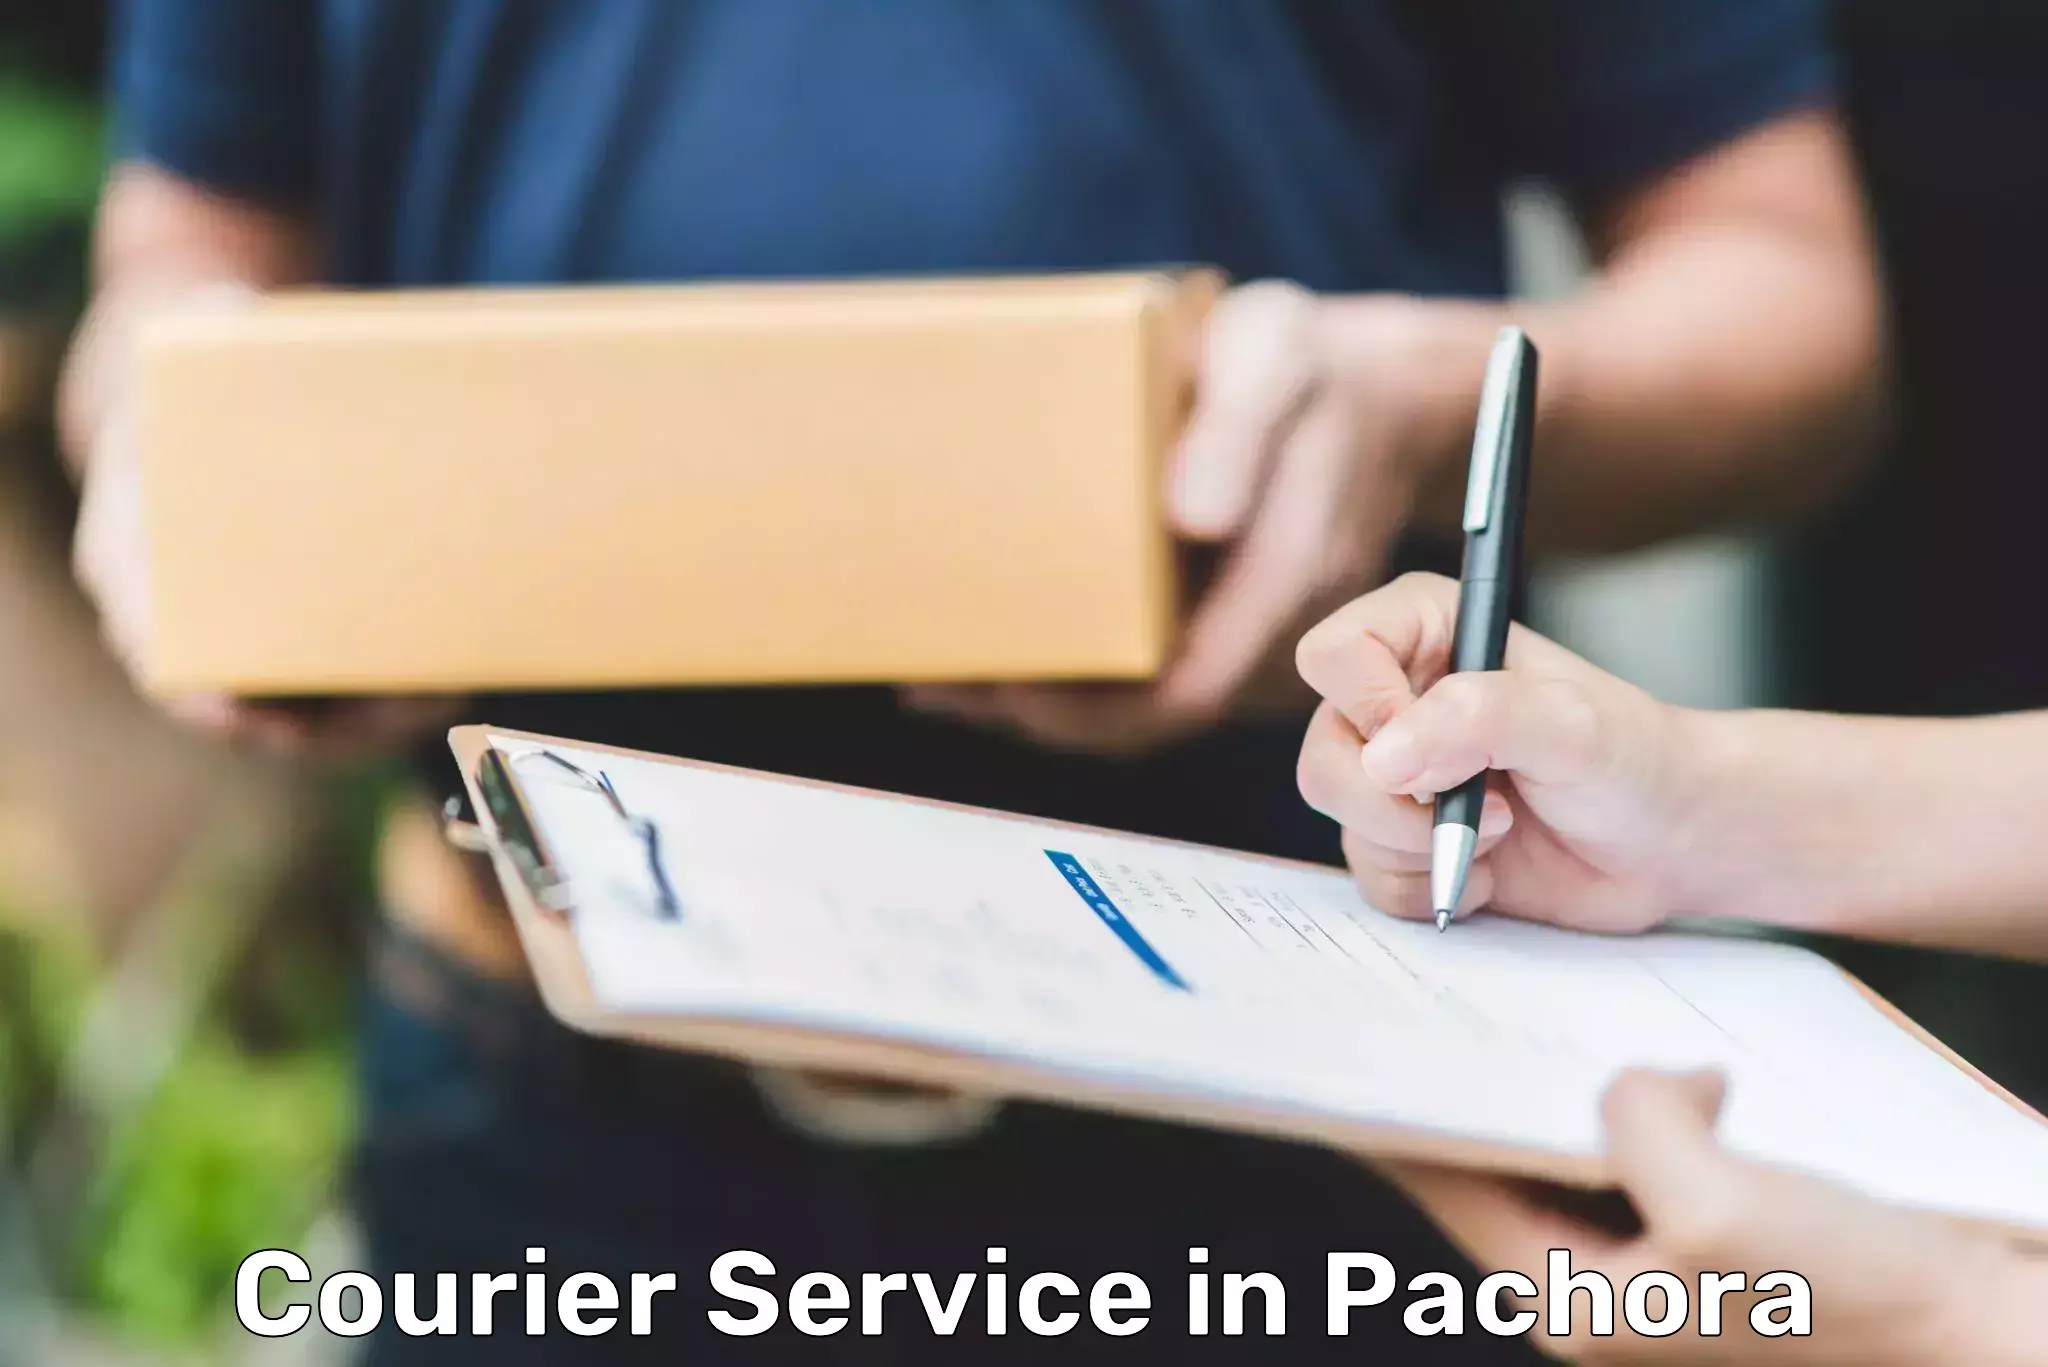 Specialized shipment handling in Pachora